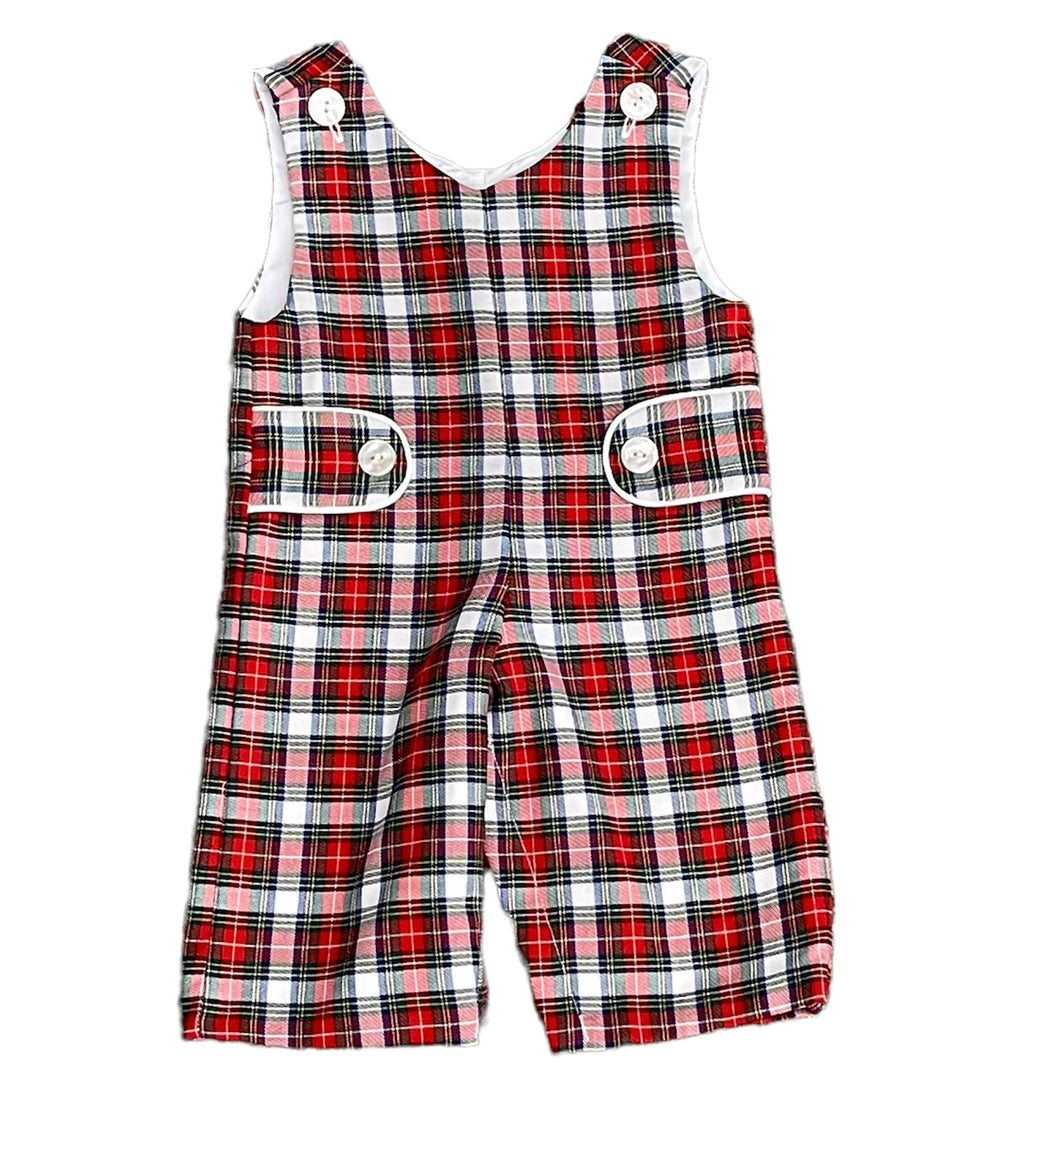 Anvy Red/White Plaid Nick Longall